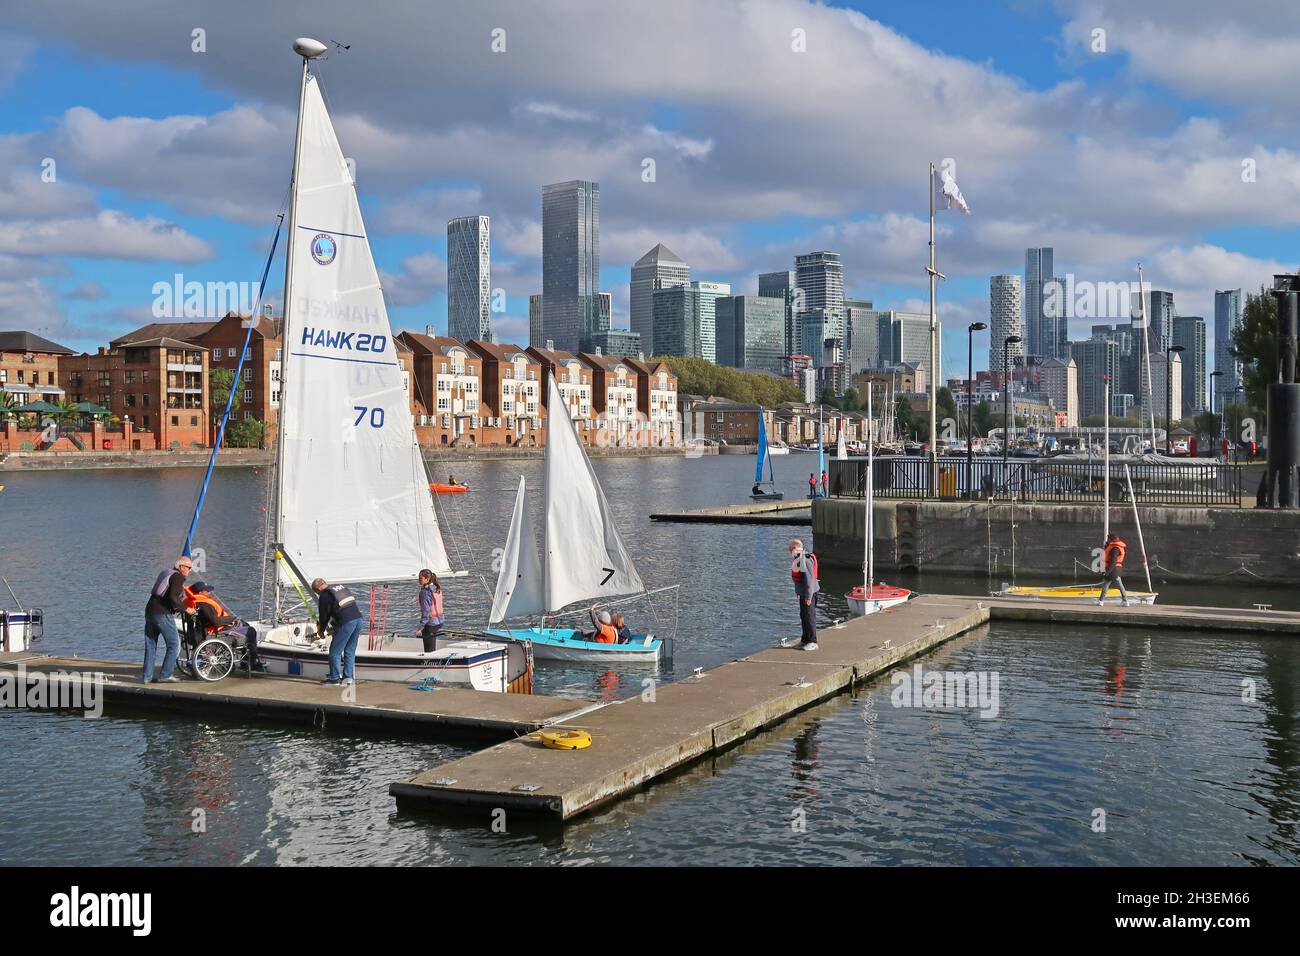 A disabled man is helped to a sailing boat  at Greenland Dock Watersports Centre, part of the old Surrey Docks in Rotherhithe, London, UK. Stock Photo